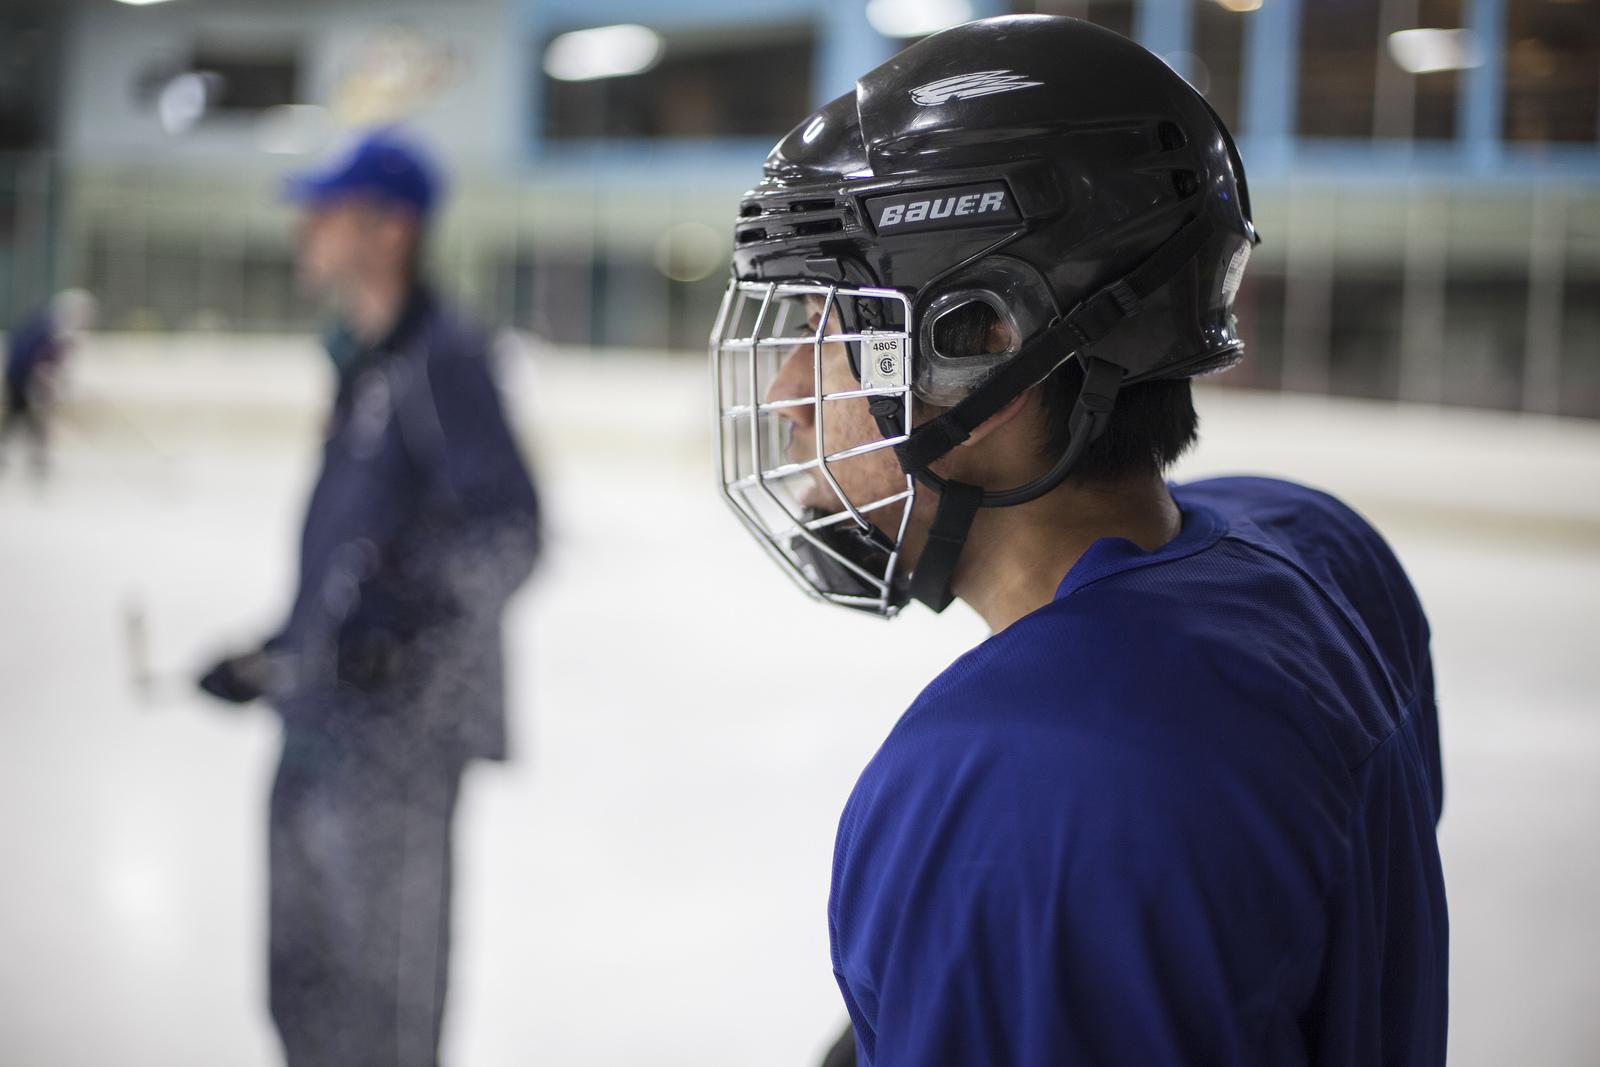 Matan Geller, SF state freshman, takes a second to breath during hockey practice on Sunday, Sept. 29, 2013 at the Ice Oasis. The team members each pitch in for ice time to be able to practice every Sunday at 10:45pm in Redwood City, Calif. Photo by Dariel Medina / Xpress